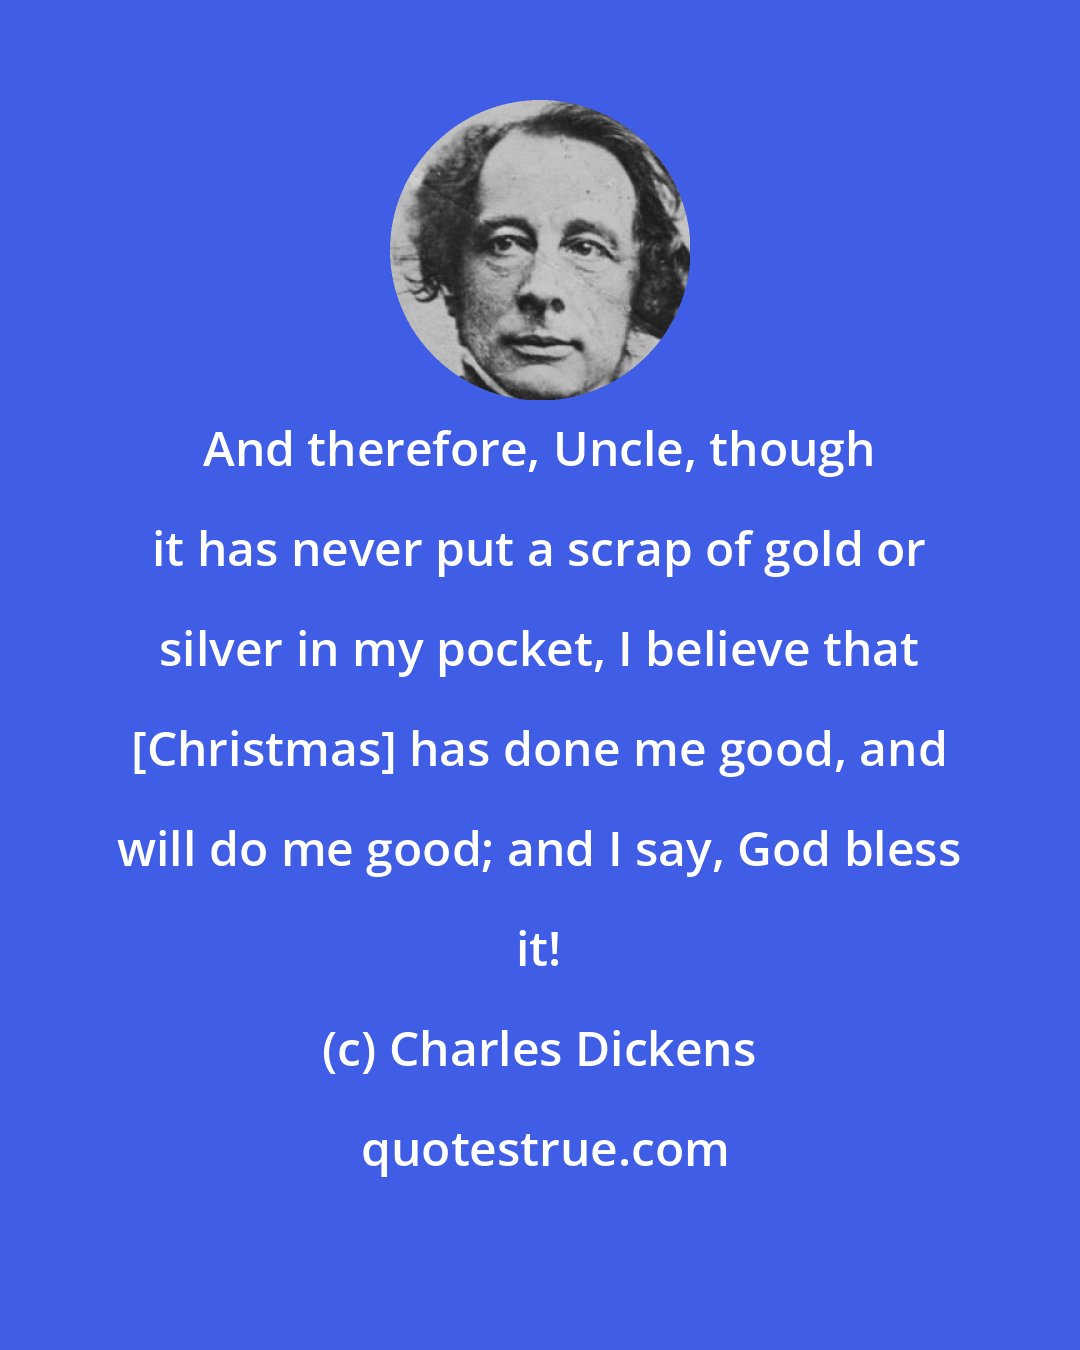 Charles Dickens: And therefore, Uncle, though it has never put a scrap of gold or silver in my pocket, I believe that [Christmas] has done me good, and will do me good; and I say, God bless it!